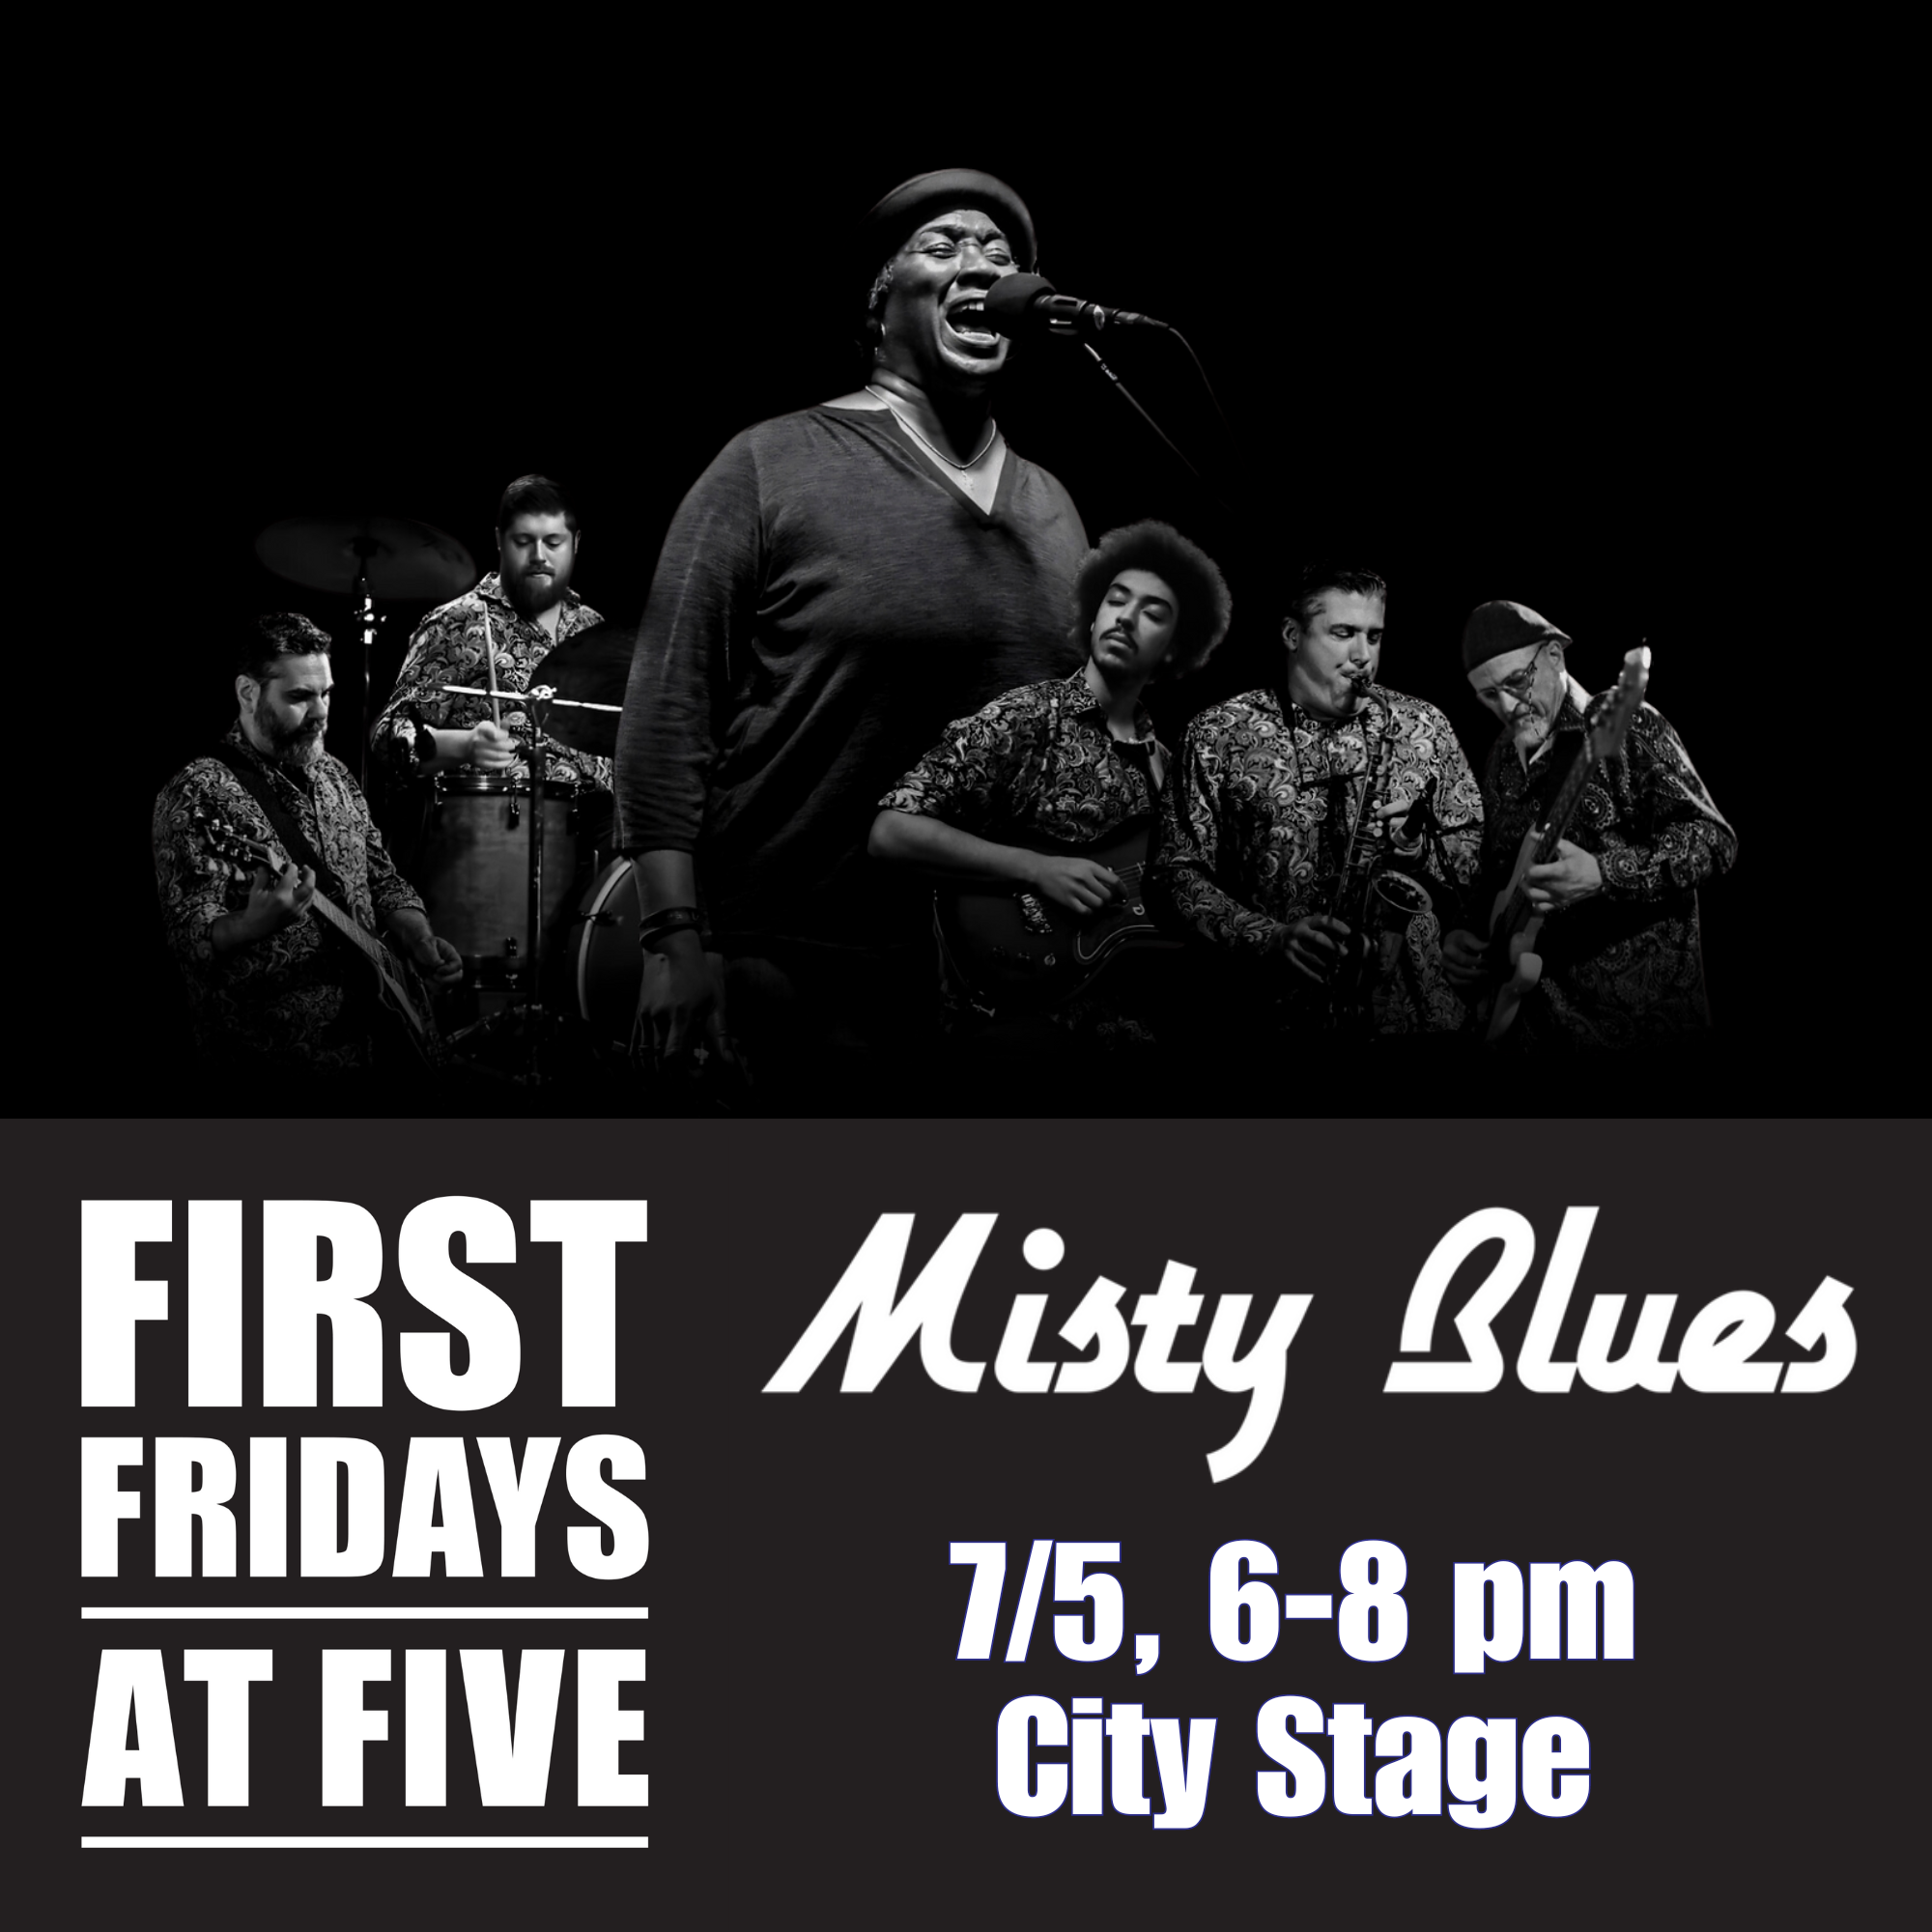 The Amy Ryan Band and Misty Blues on the City Stage